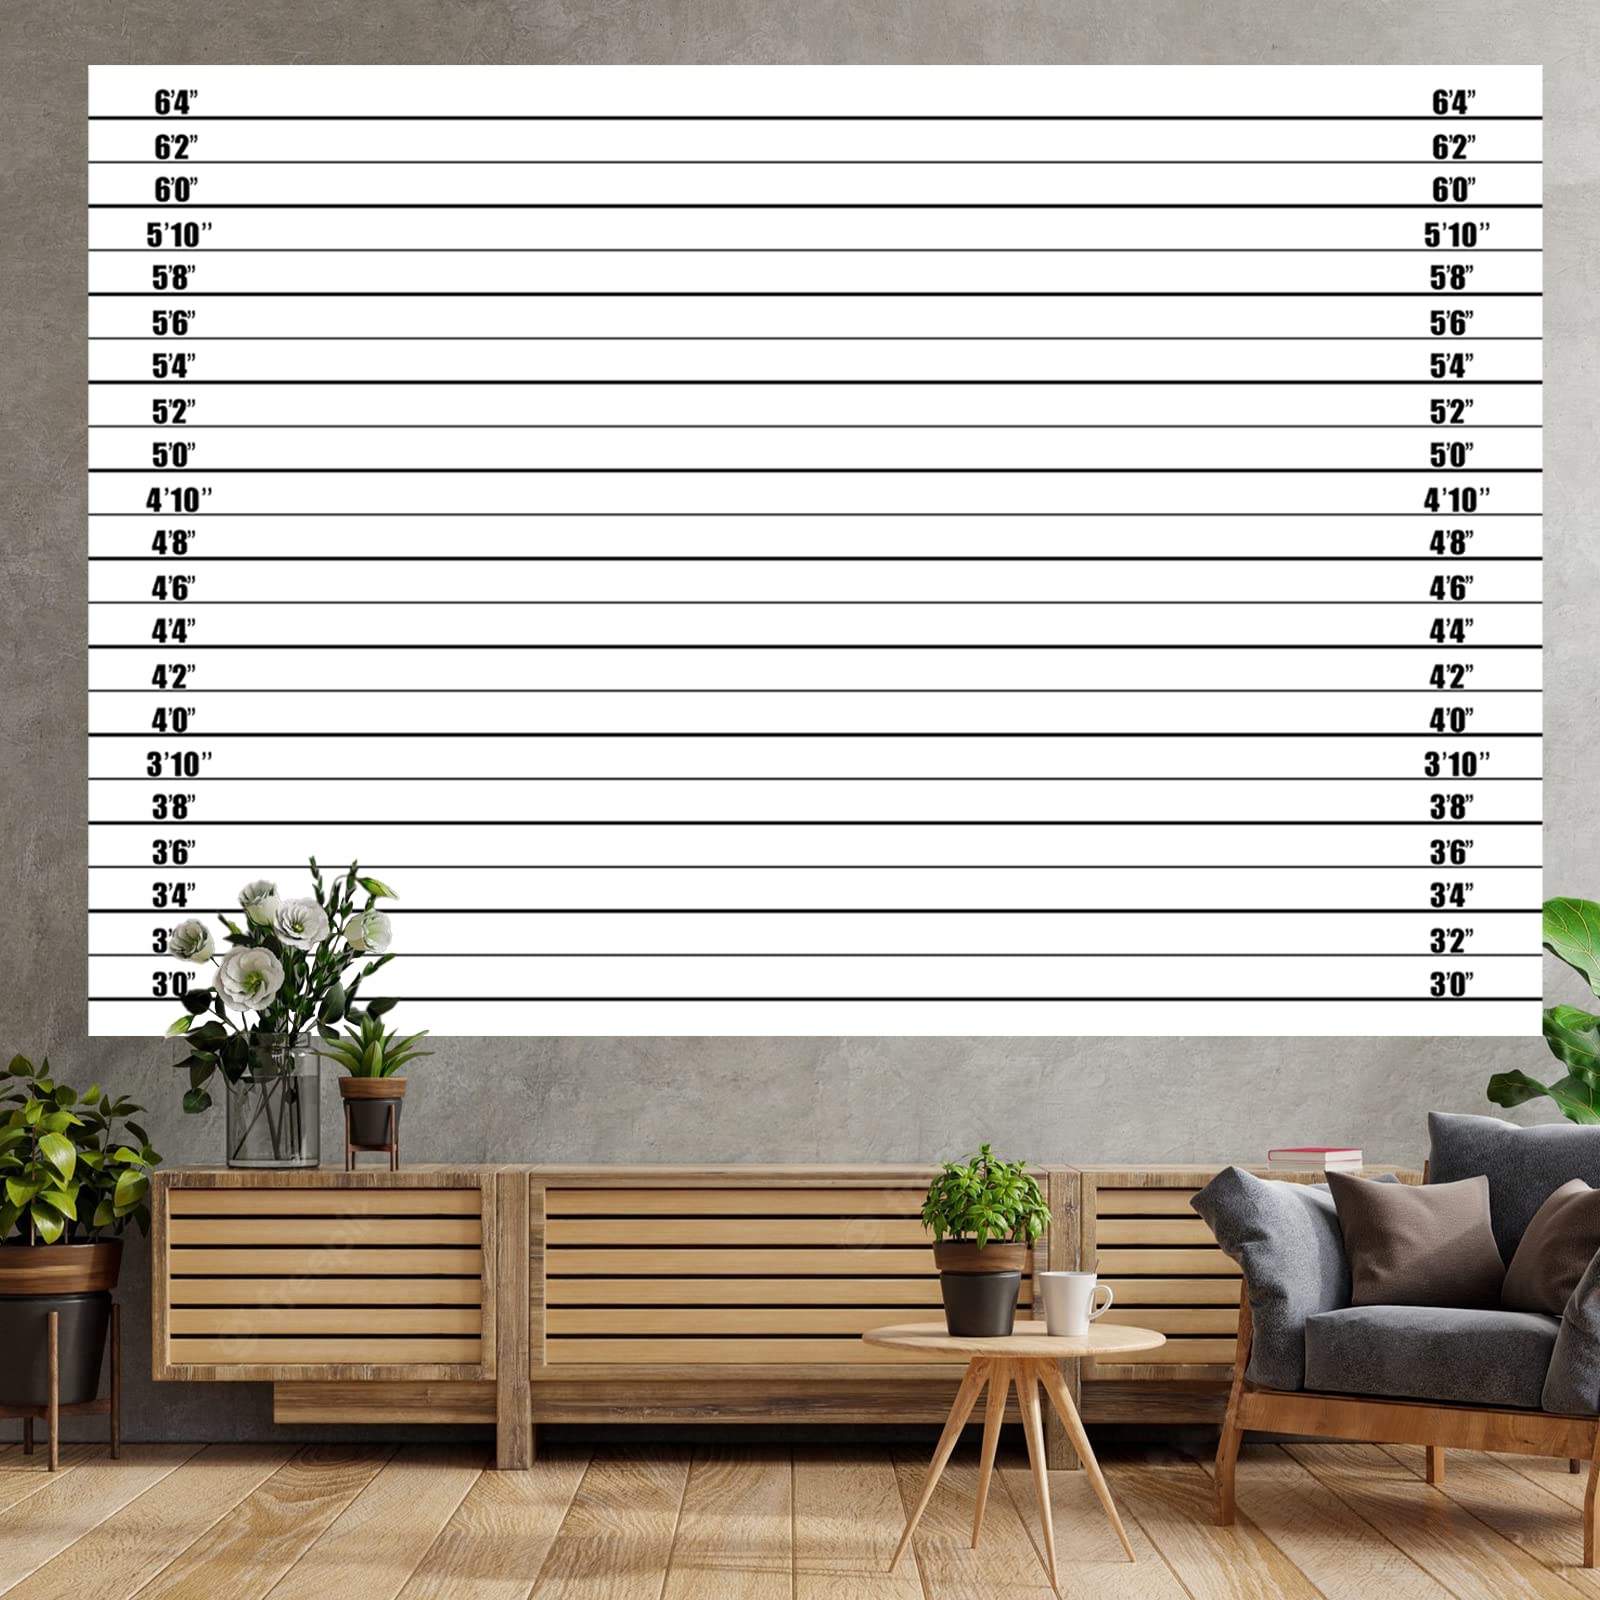 Mugshot Police Lineup Height Charts Banner Accurate Measurements Theme Decor for Girls Bridal Shower Birthday Party Wedding Bachelorette Party Supplies Night Out Party Decorations Backdrop Background